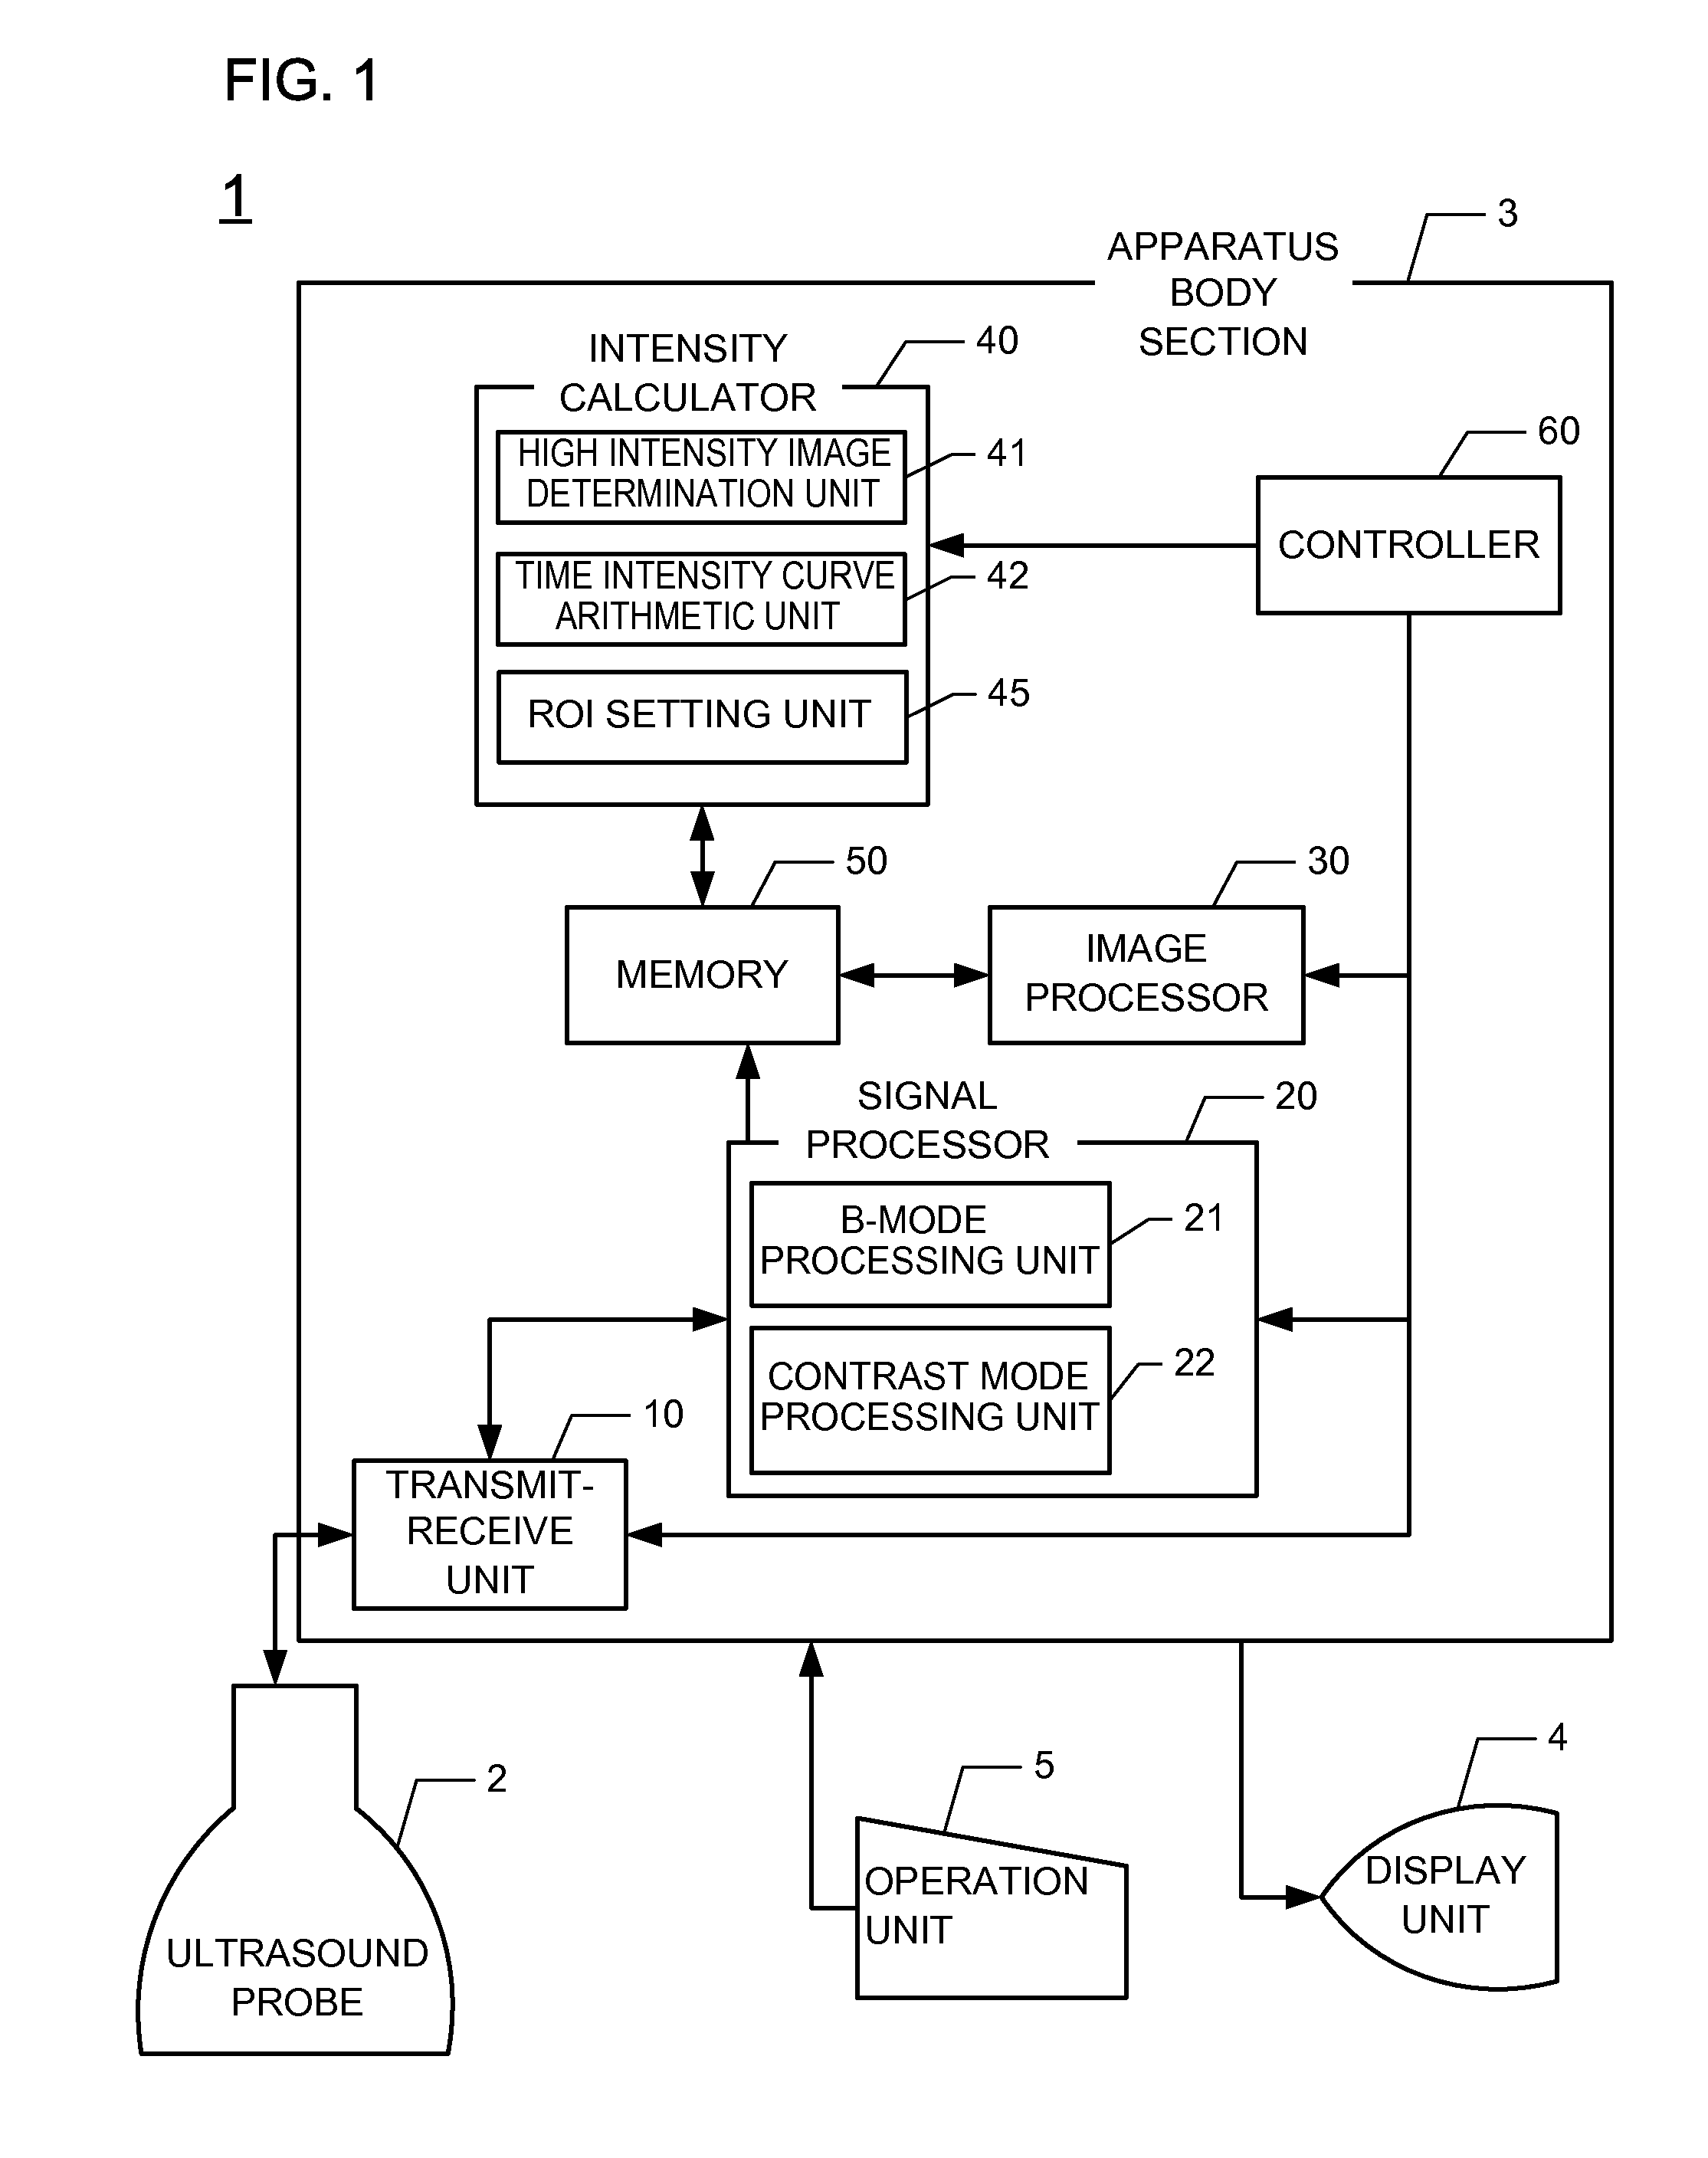 Ultrasound diagnostic apparatus and method of determining a time intensity curve